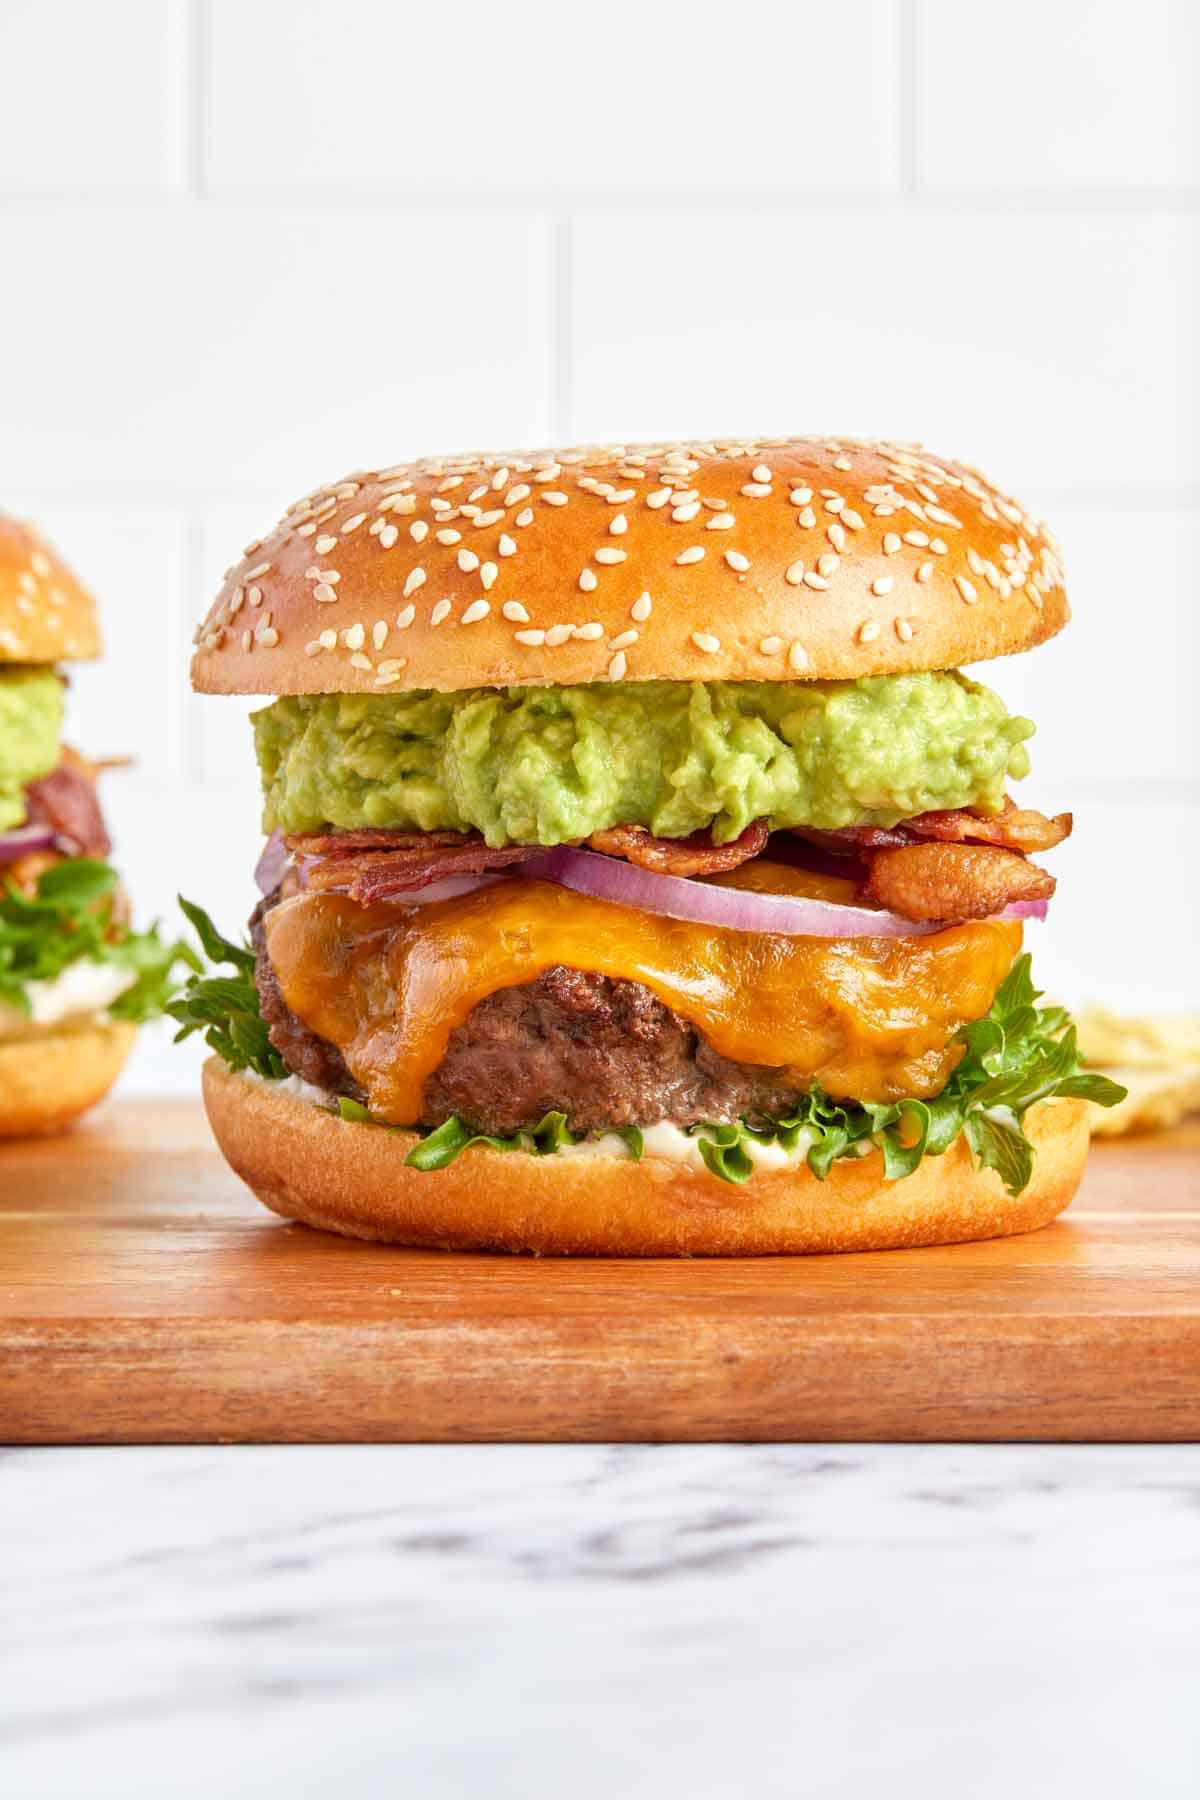 Profile view of an avocado burger on a cutting board.